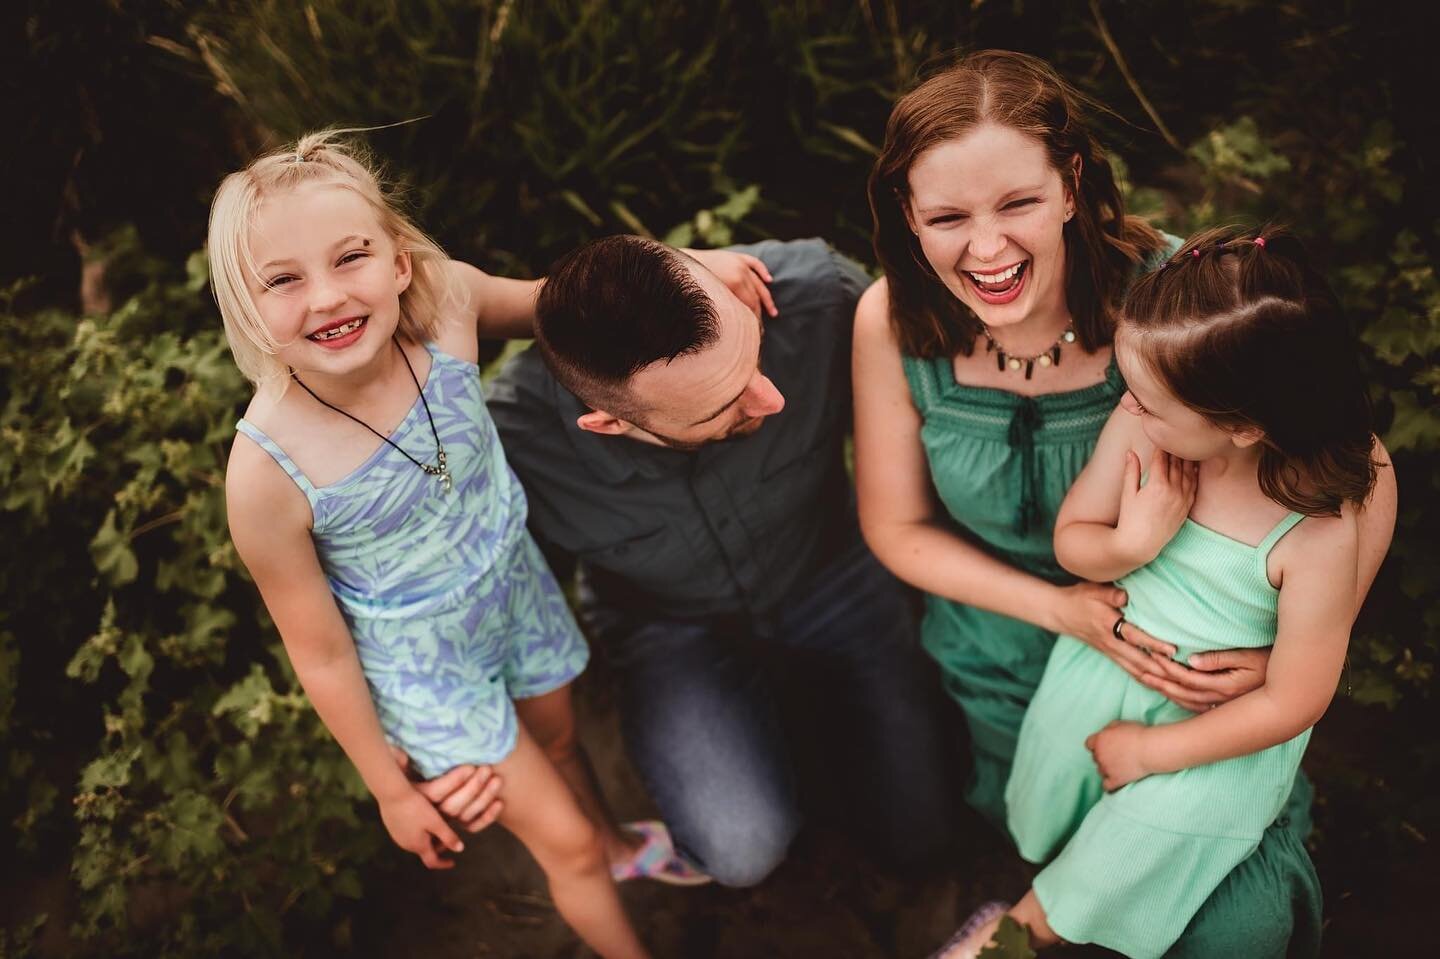 I love working with this family so much I got to do their session twice! More on that mishap later, but so thankful for understanding clients 🥺❤️ Just as adorable during Round 2!